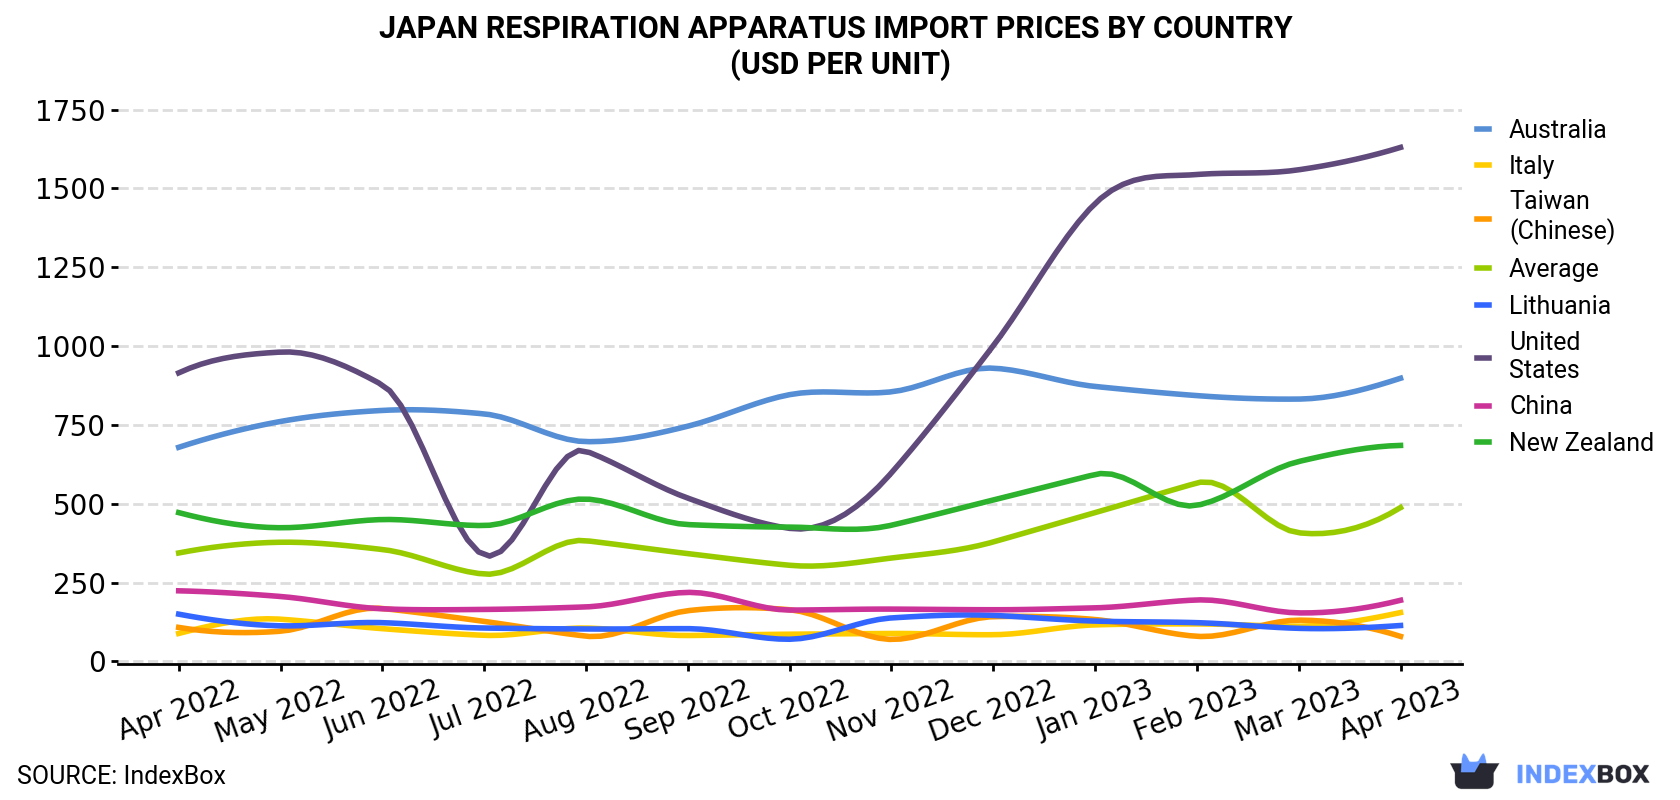 Japan Respiration Apparatus Import Prices By Country (USD Per Unit)